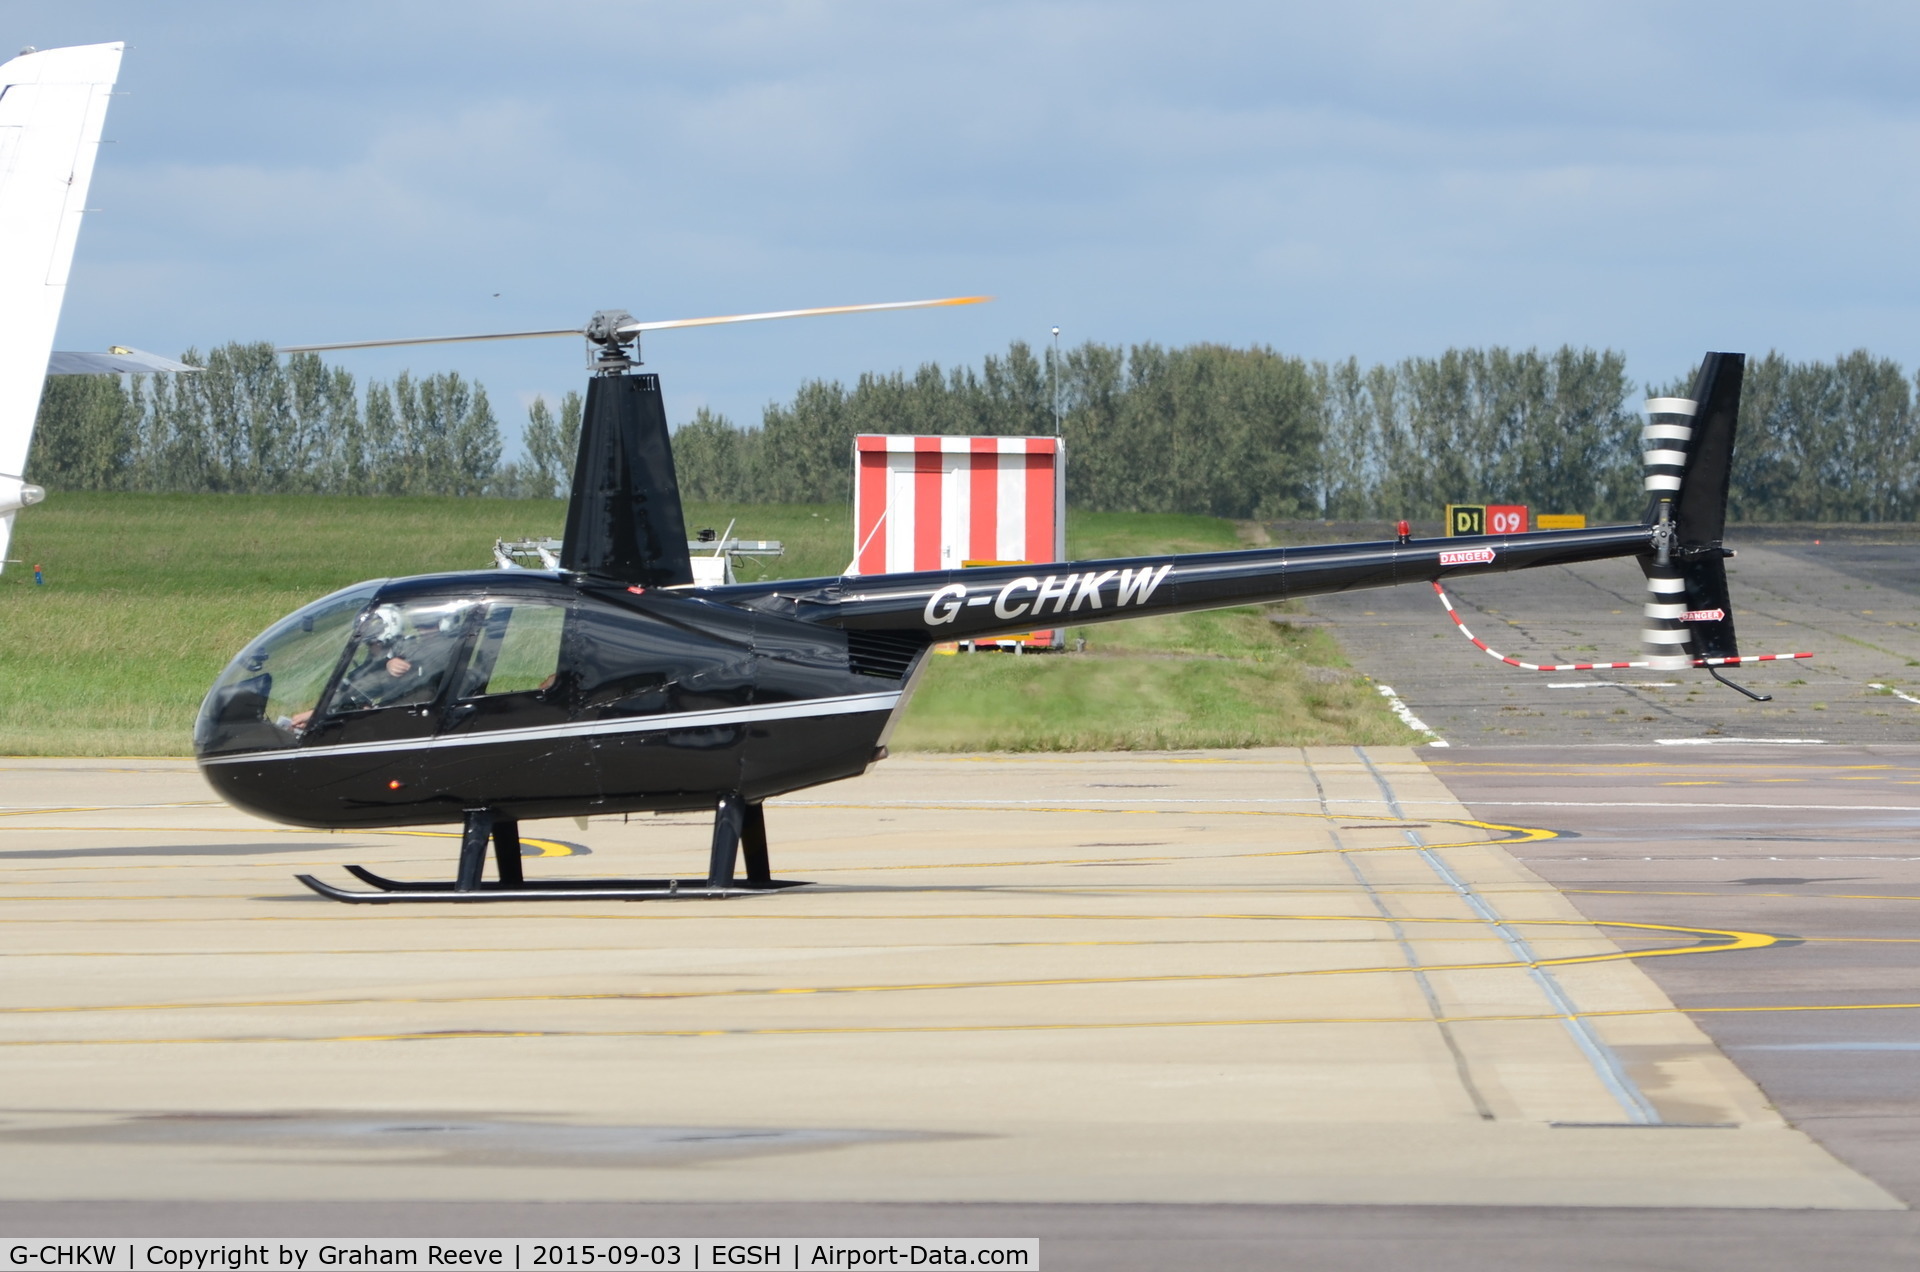 G-CHKW, 2005 Robinson R44 Raven I C/N 1504, On the ground at Norwich.